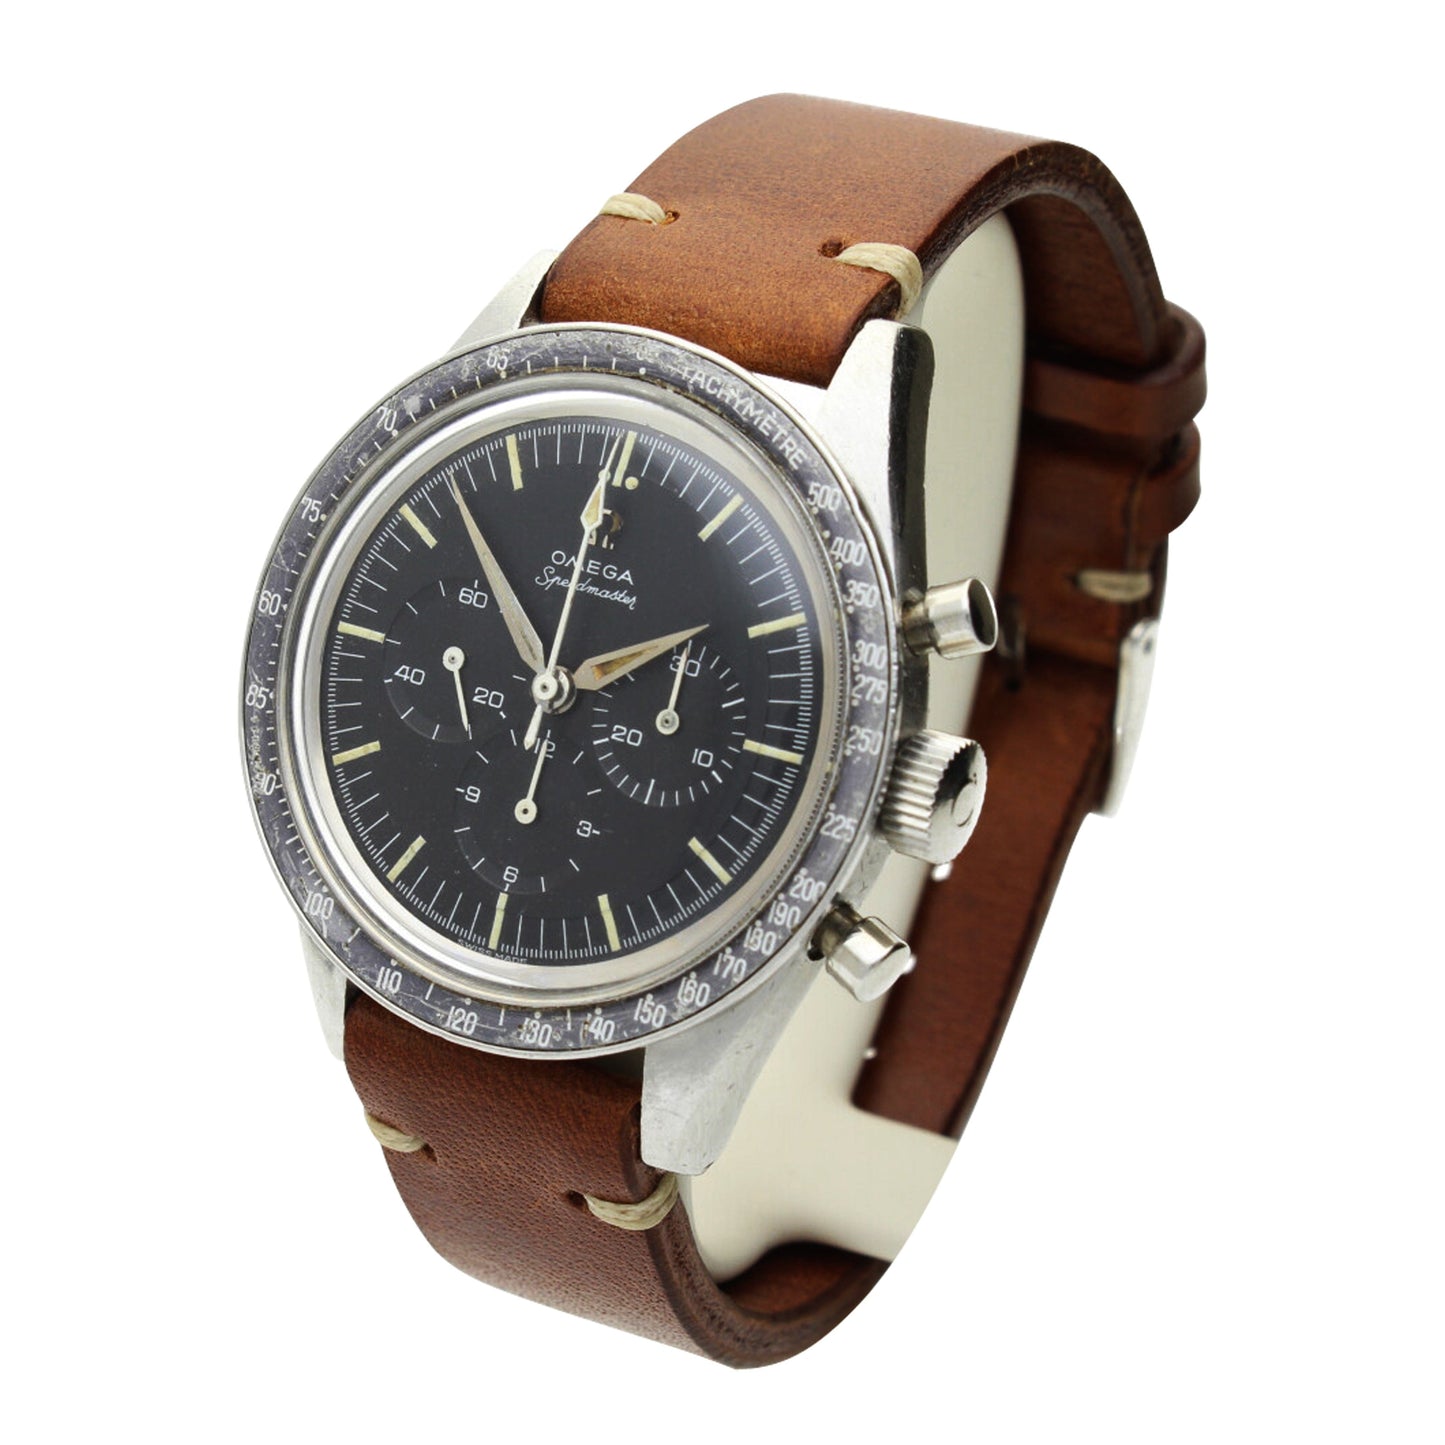 Stainless steel Speedmaster, reference 2998-62 chronograph wristwatch. Made 1962